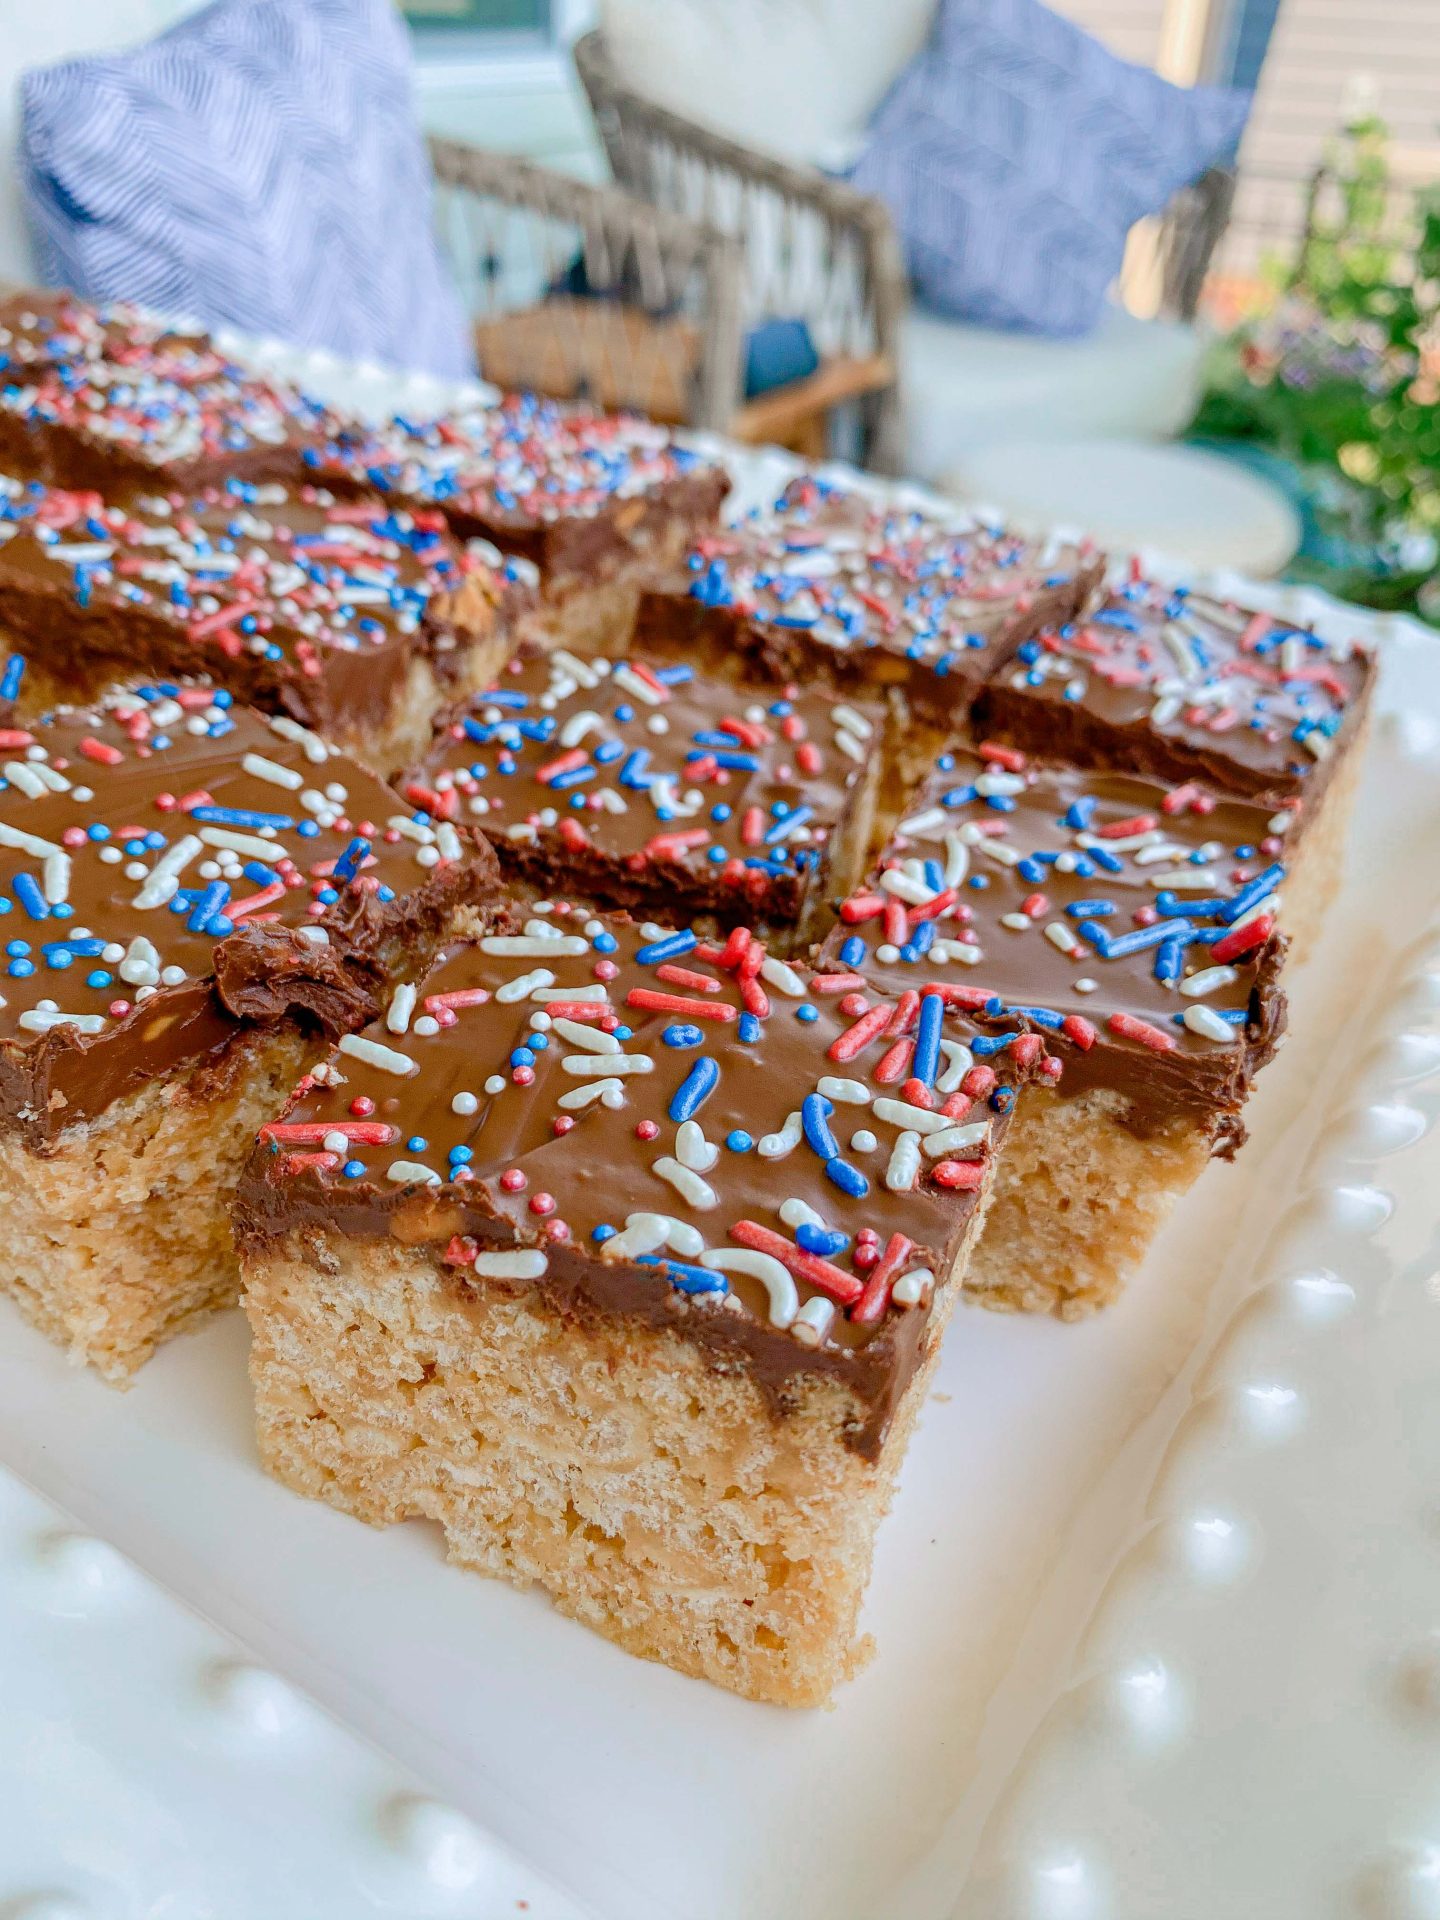 Scotcharoos, 4th of July, Rice Krispies, Red White and Blue Dessert, Scotcharoo recipe, holiday, July, memorial day, Labor Day, peanut butter Rice Krispies, chocolate peanut butter Rice Krispies, summer treats, no bake 